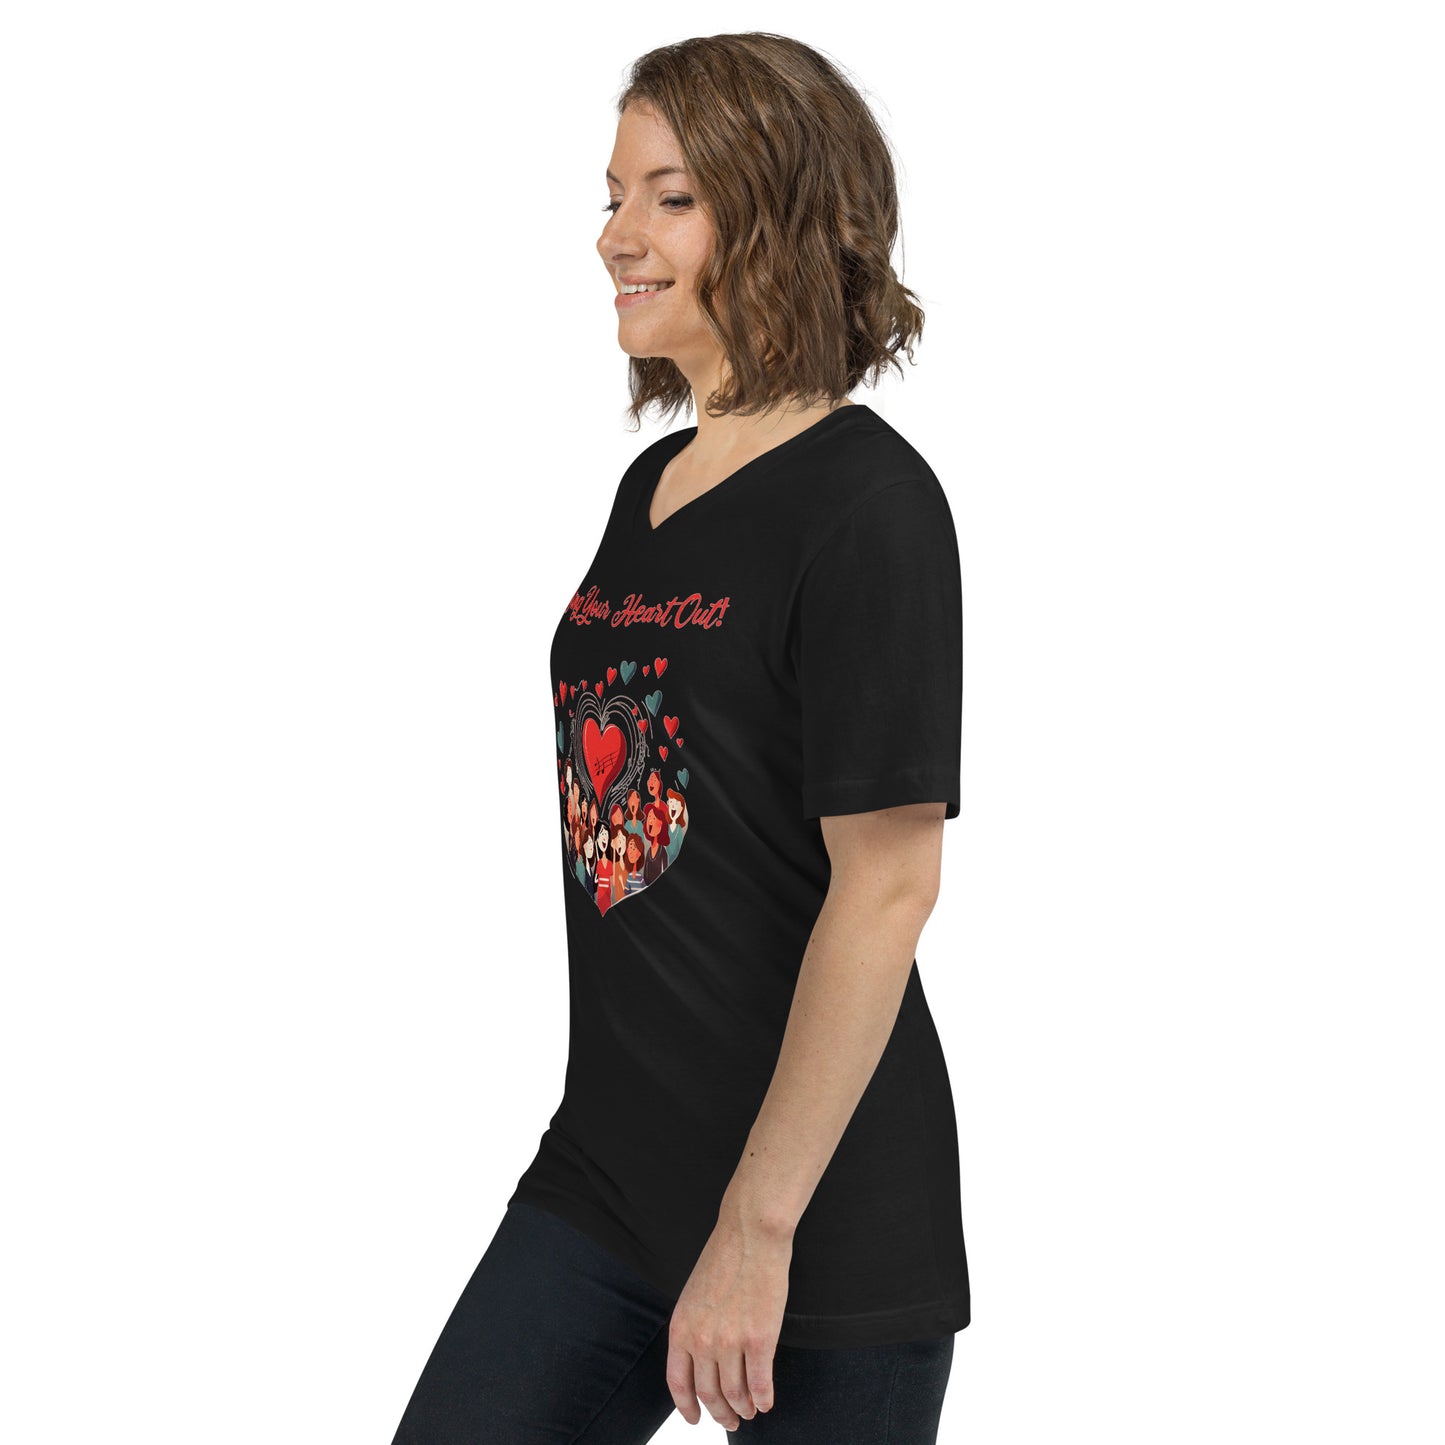 Sing Your Heart Out - Unisex Short Sleeve V-Neck T-Shirt